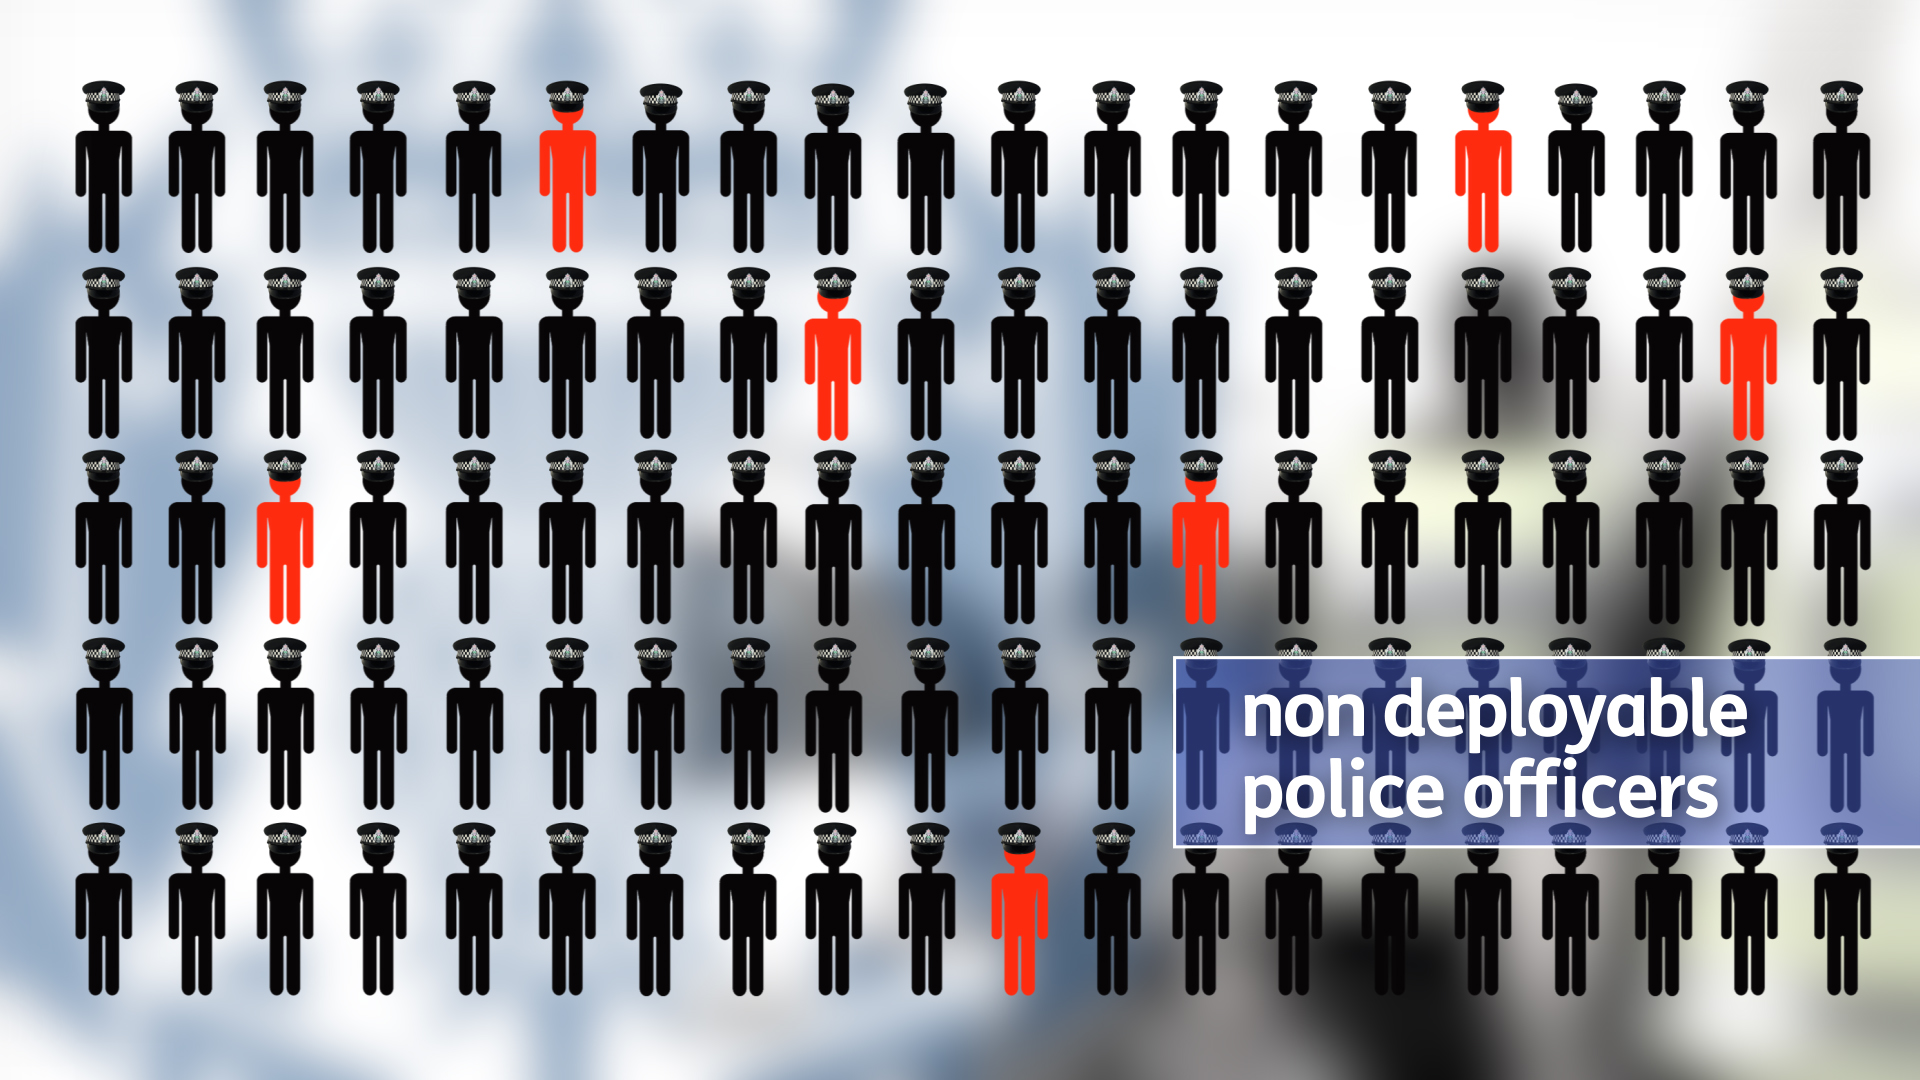 Around 7,5% of country's police officers have 'non-deployable' status, figures show